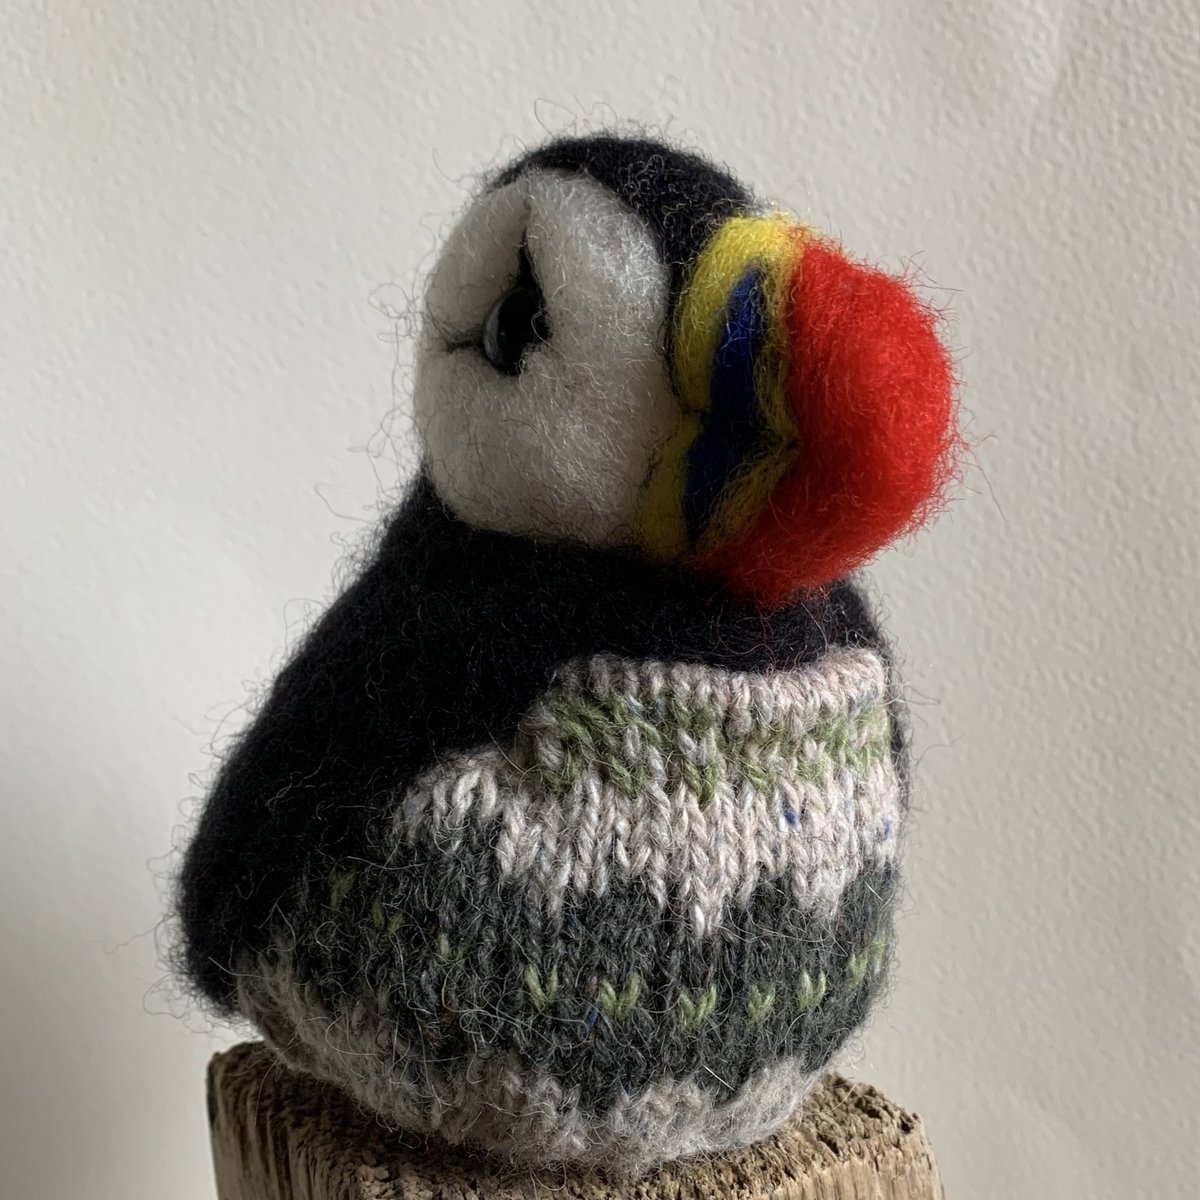 Just added this this wee guy to my Etsy shop! Needle felted with a knitted tummy!! #puffins #fairisleknitting